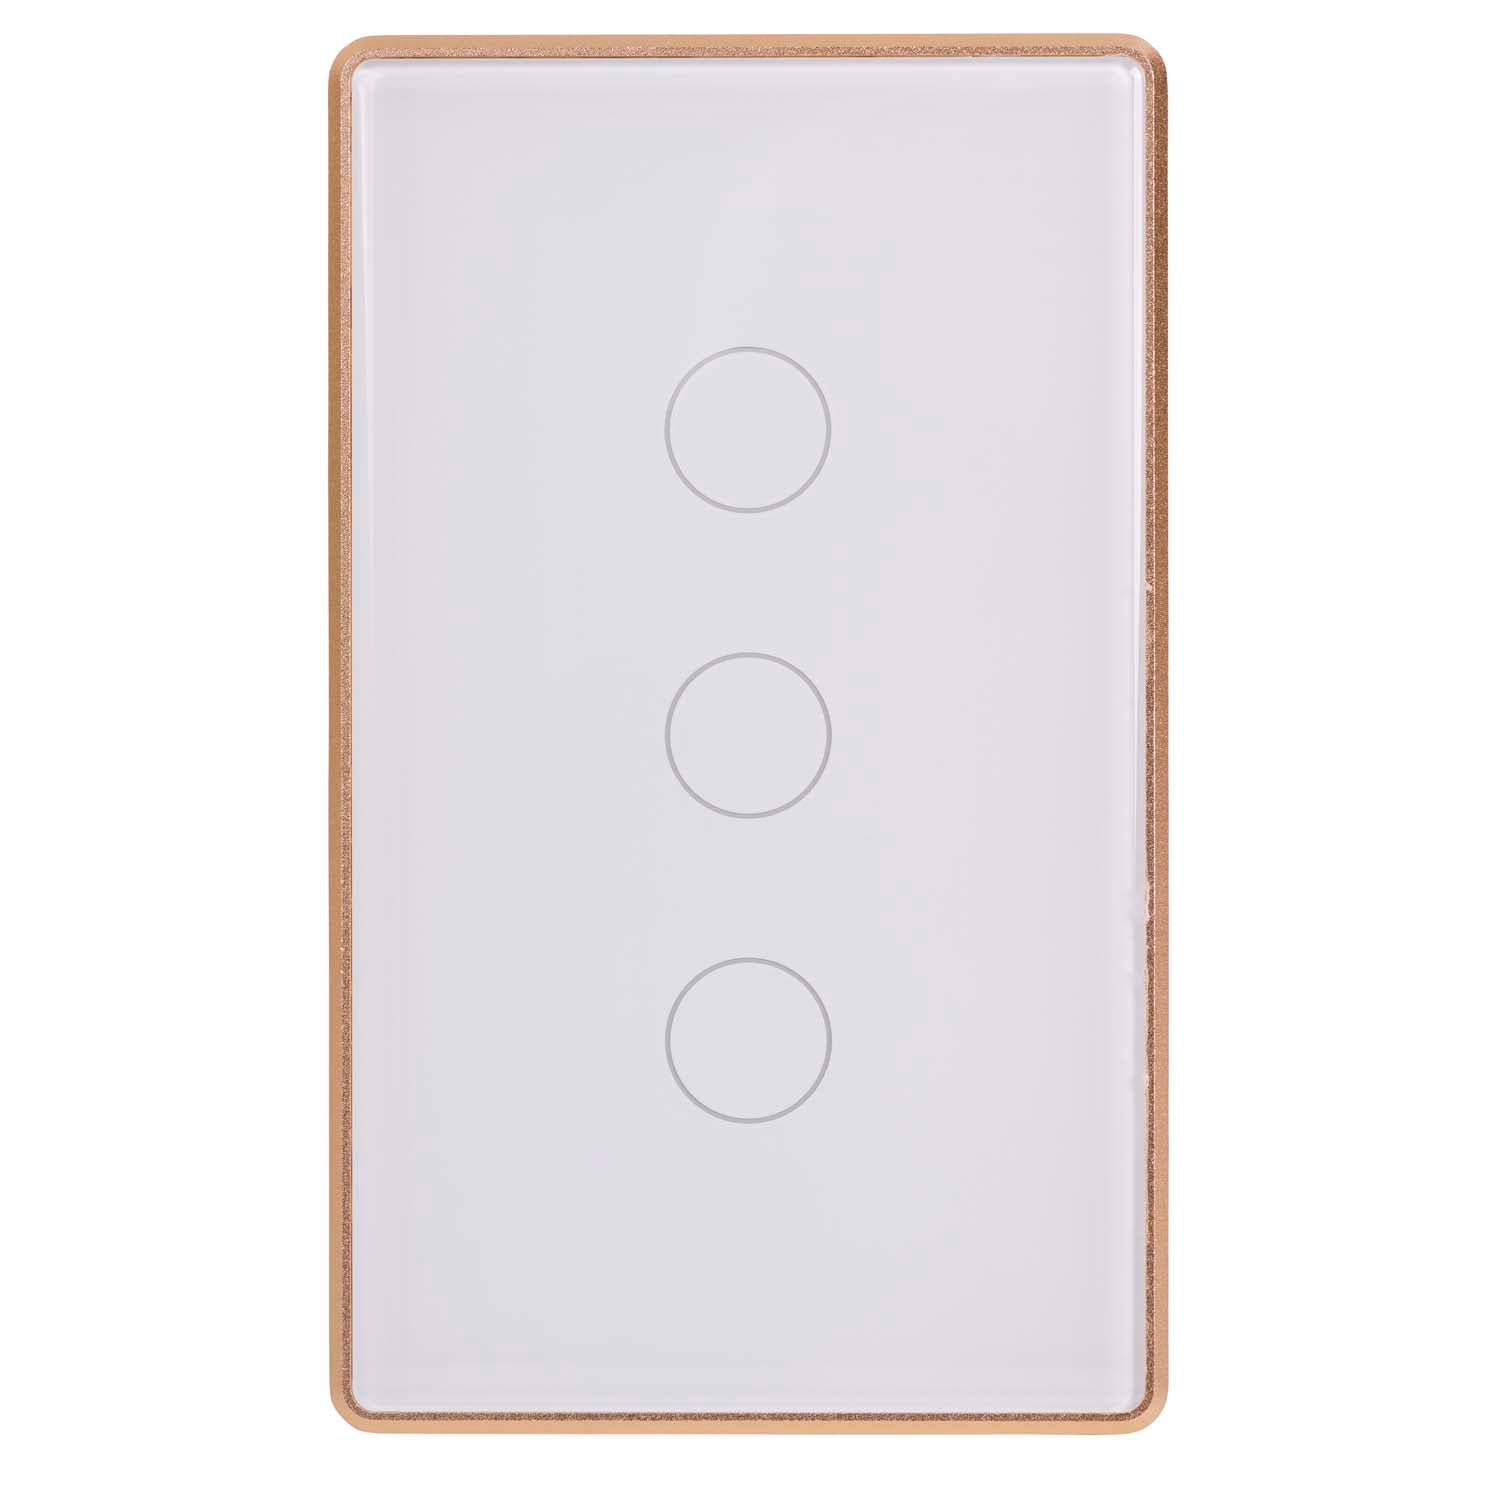 HV9120-3 - Wifi 3 Gang White with Gold Trim Wall Switch